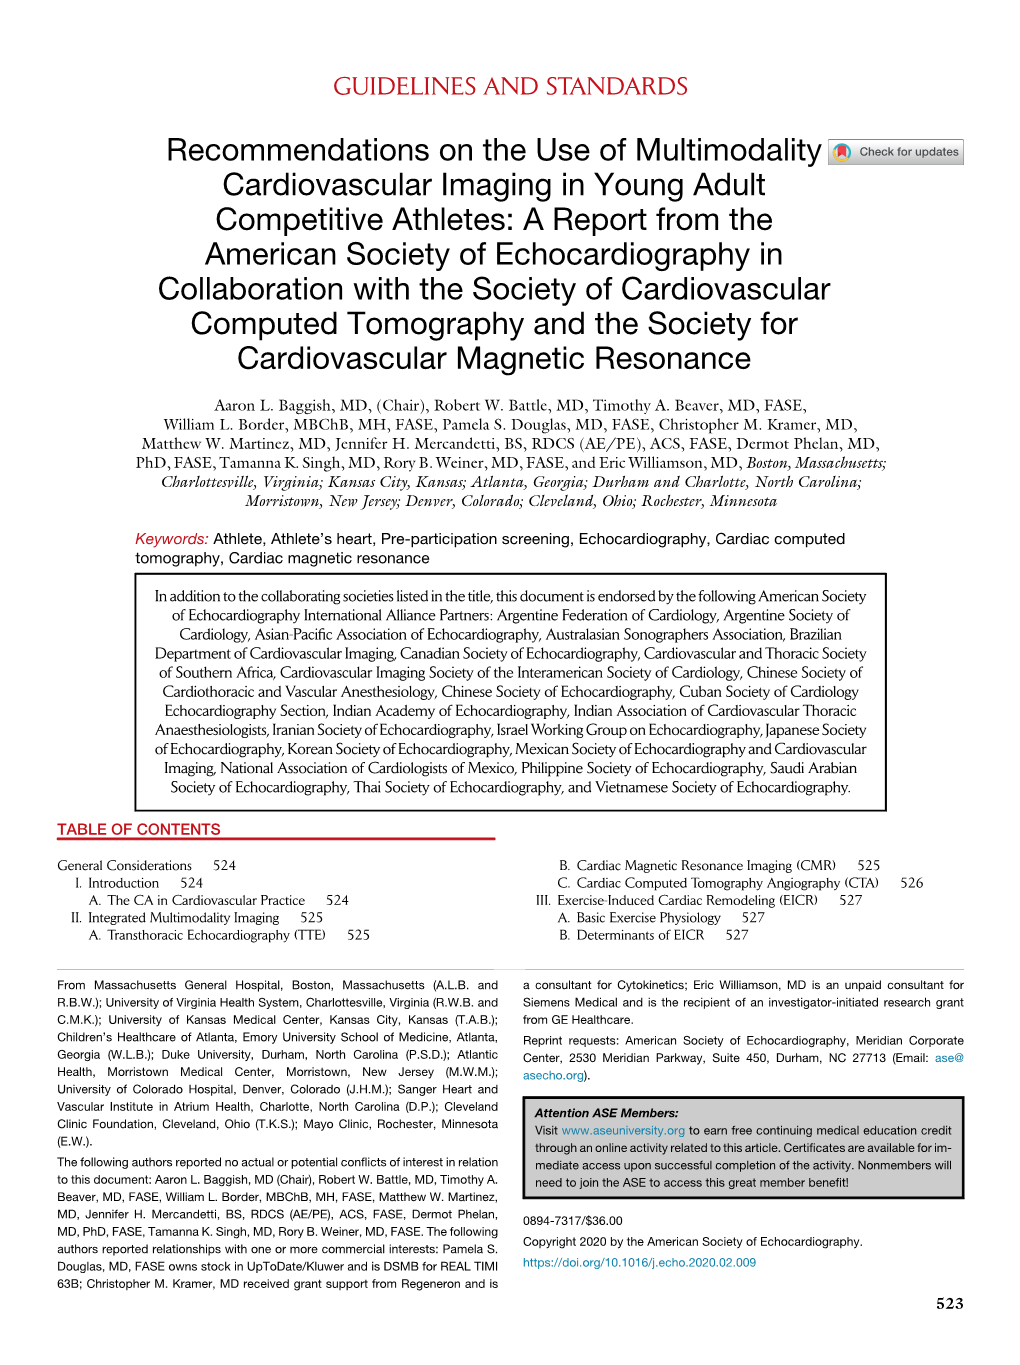 Use of Multimodality Cardiovascular Imaging in Young Adult Competitive